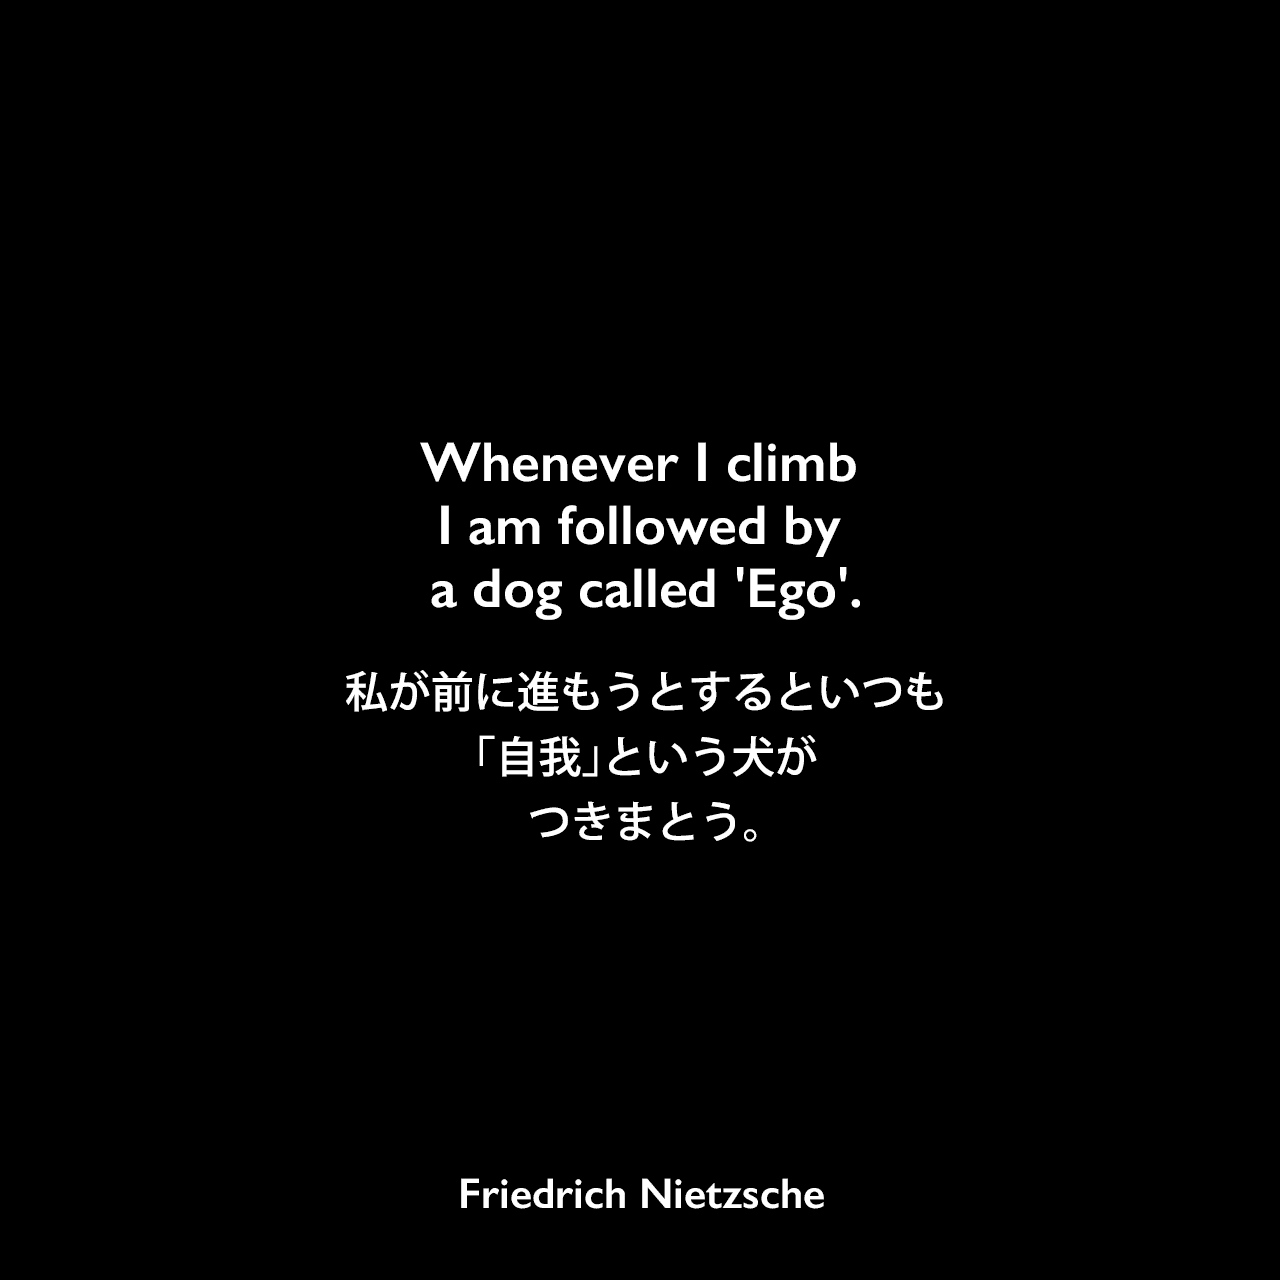 Whenever I climb I am followed by a dog called 'Ego'.私が前に進もうとするといつも「自我」という犬がつきまとう。Friedrich Nietzsche